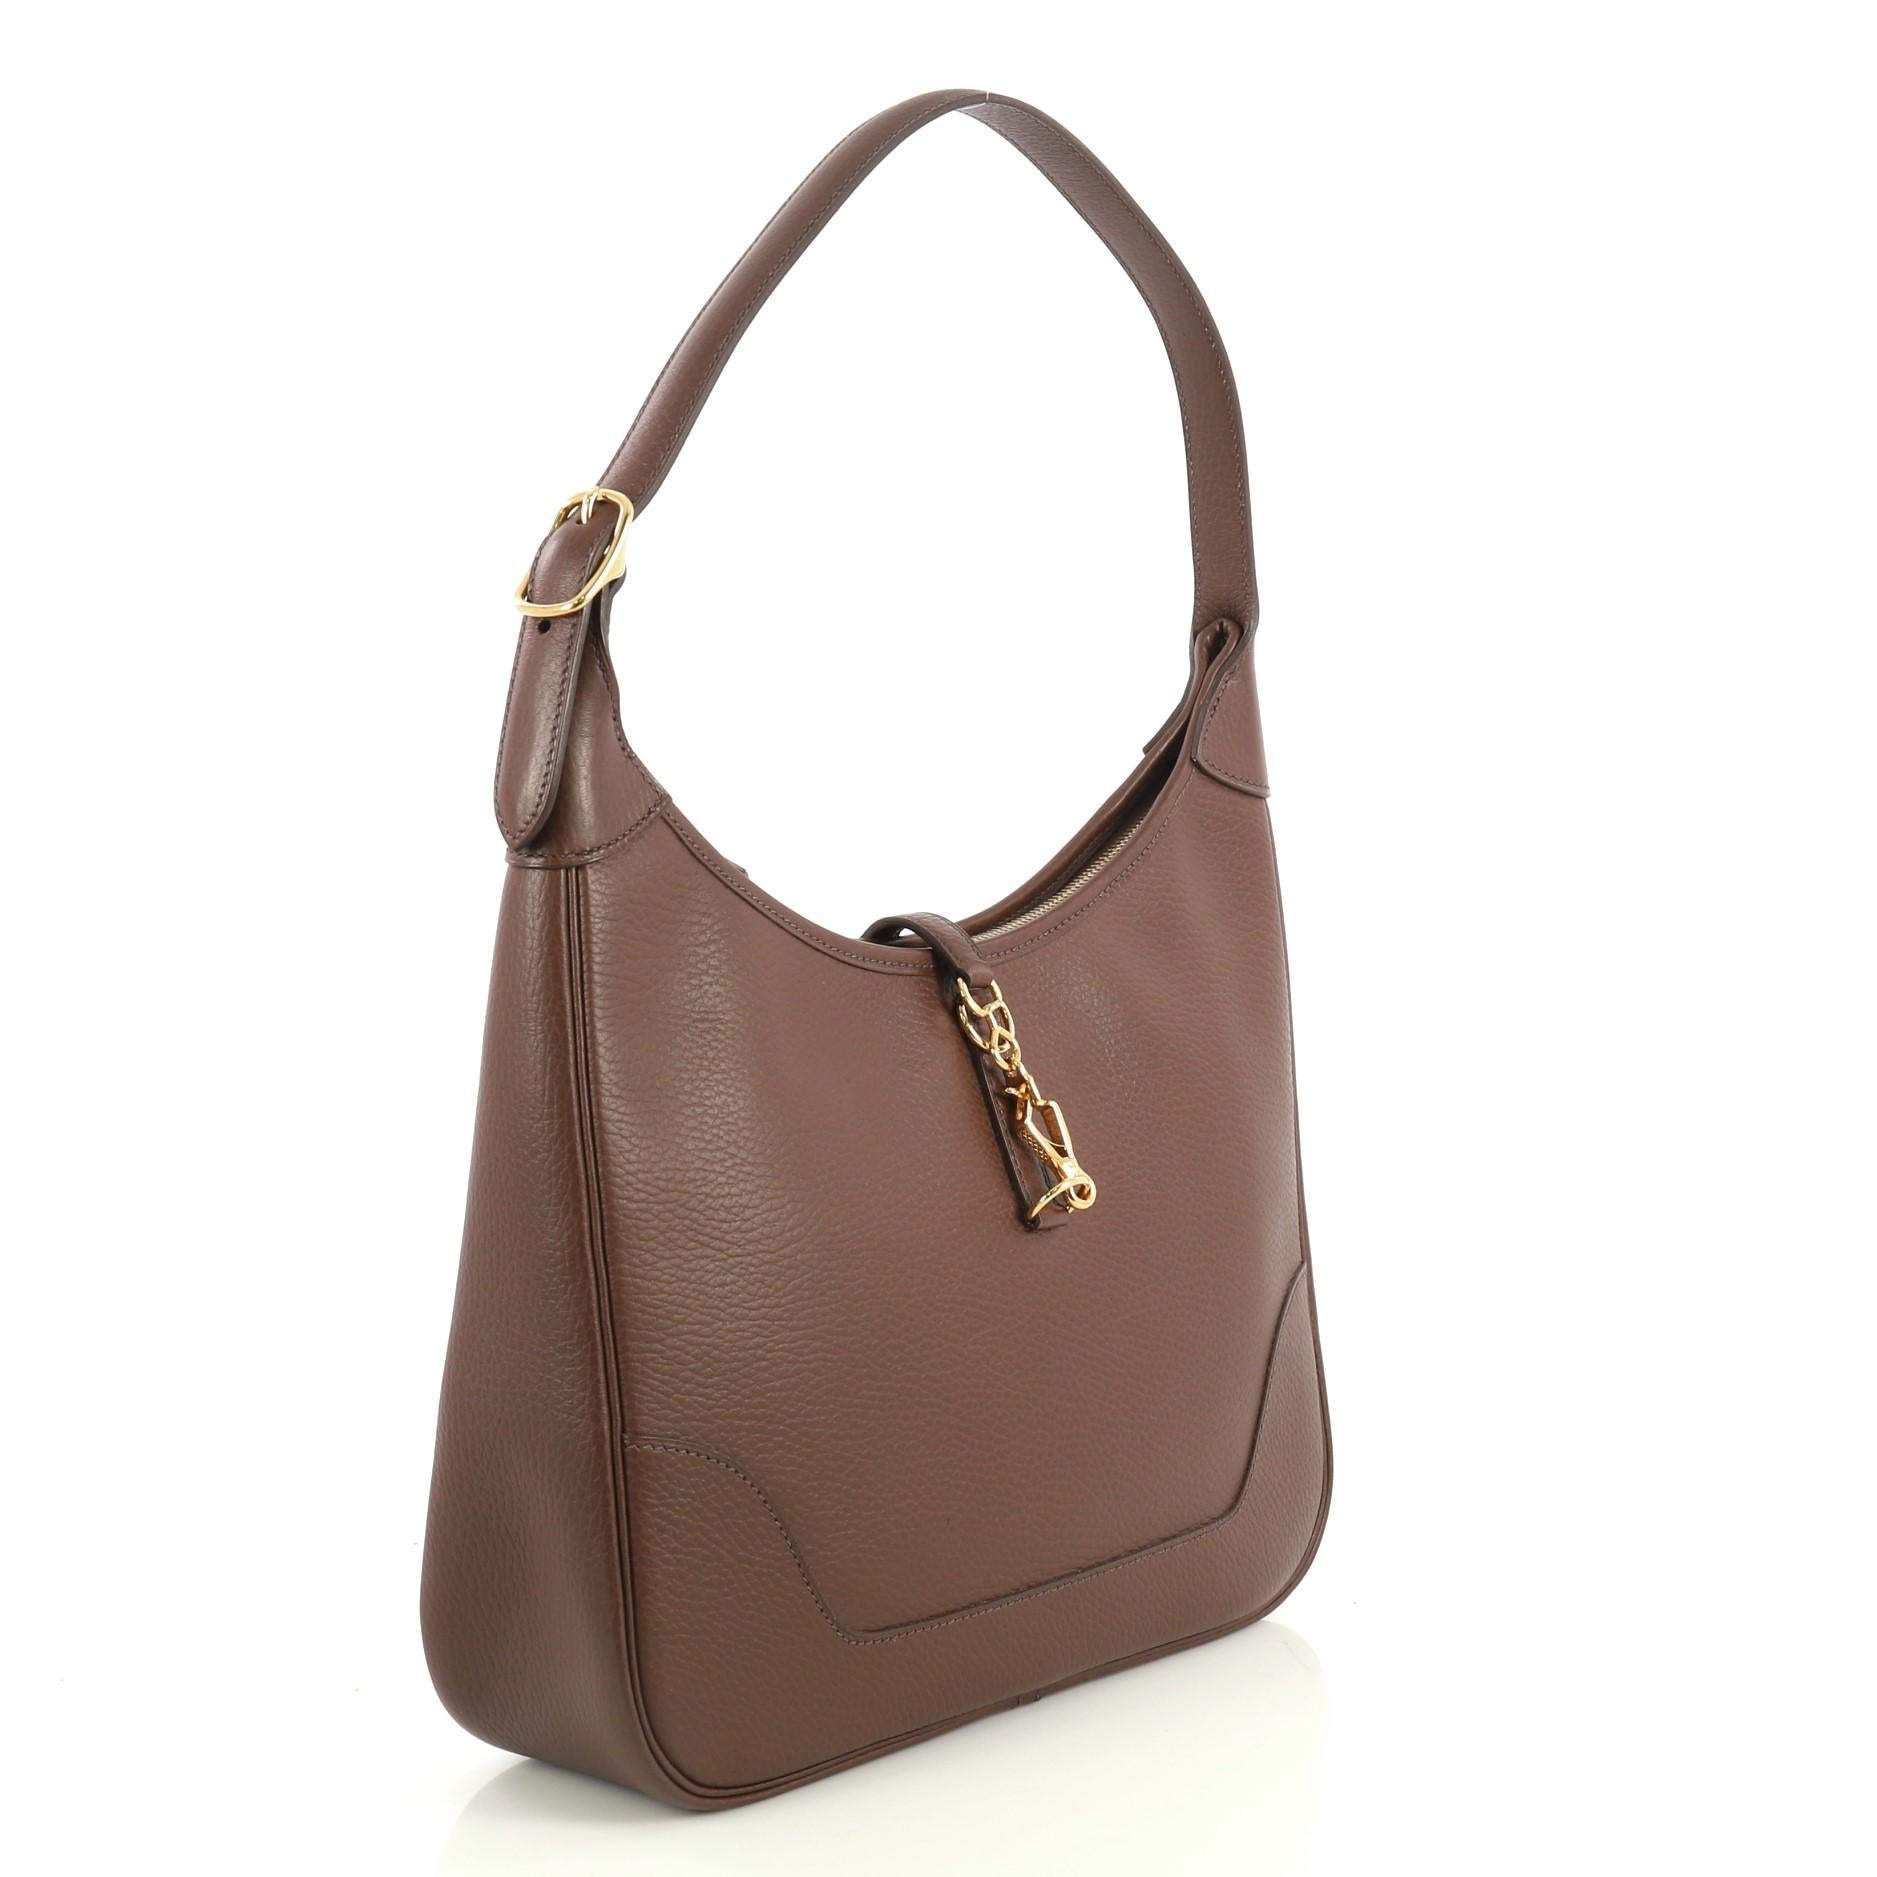 This Hermes Trim II Bag Ardennes 31, crafted in Marron Fonce brown Ardennes leather, features looped shoulder strap and gold hardware. Its clasp closure opens to a Marron Fonce brown raw leather interior with side zip and slip pockets. Date stamp